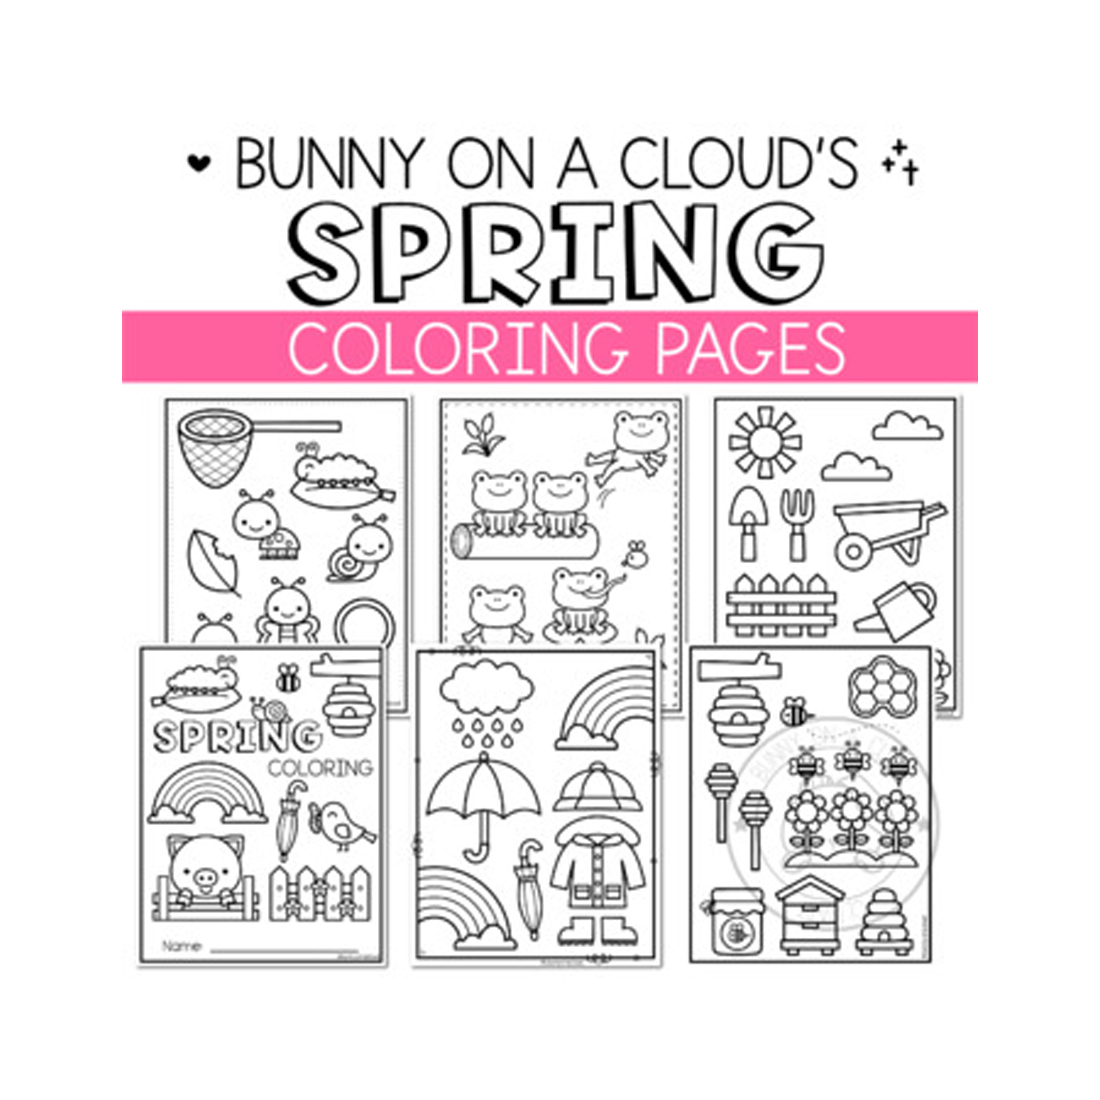 Spring Coloring Pages by Bunny On A Cloud cover image.